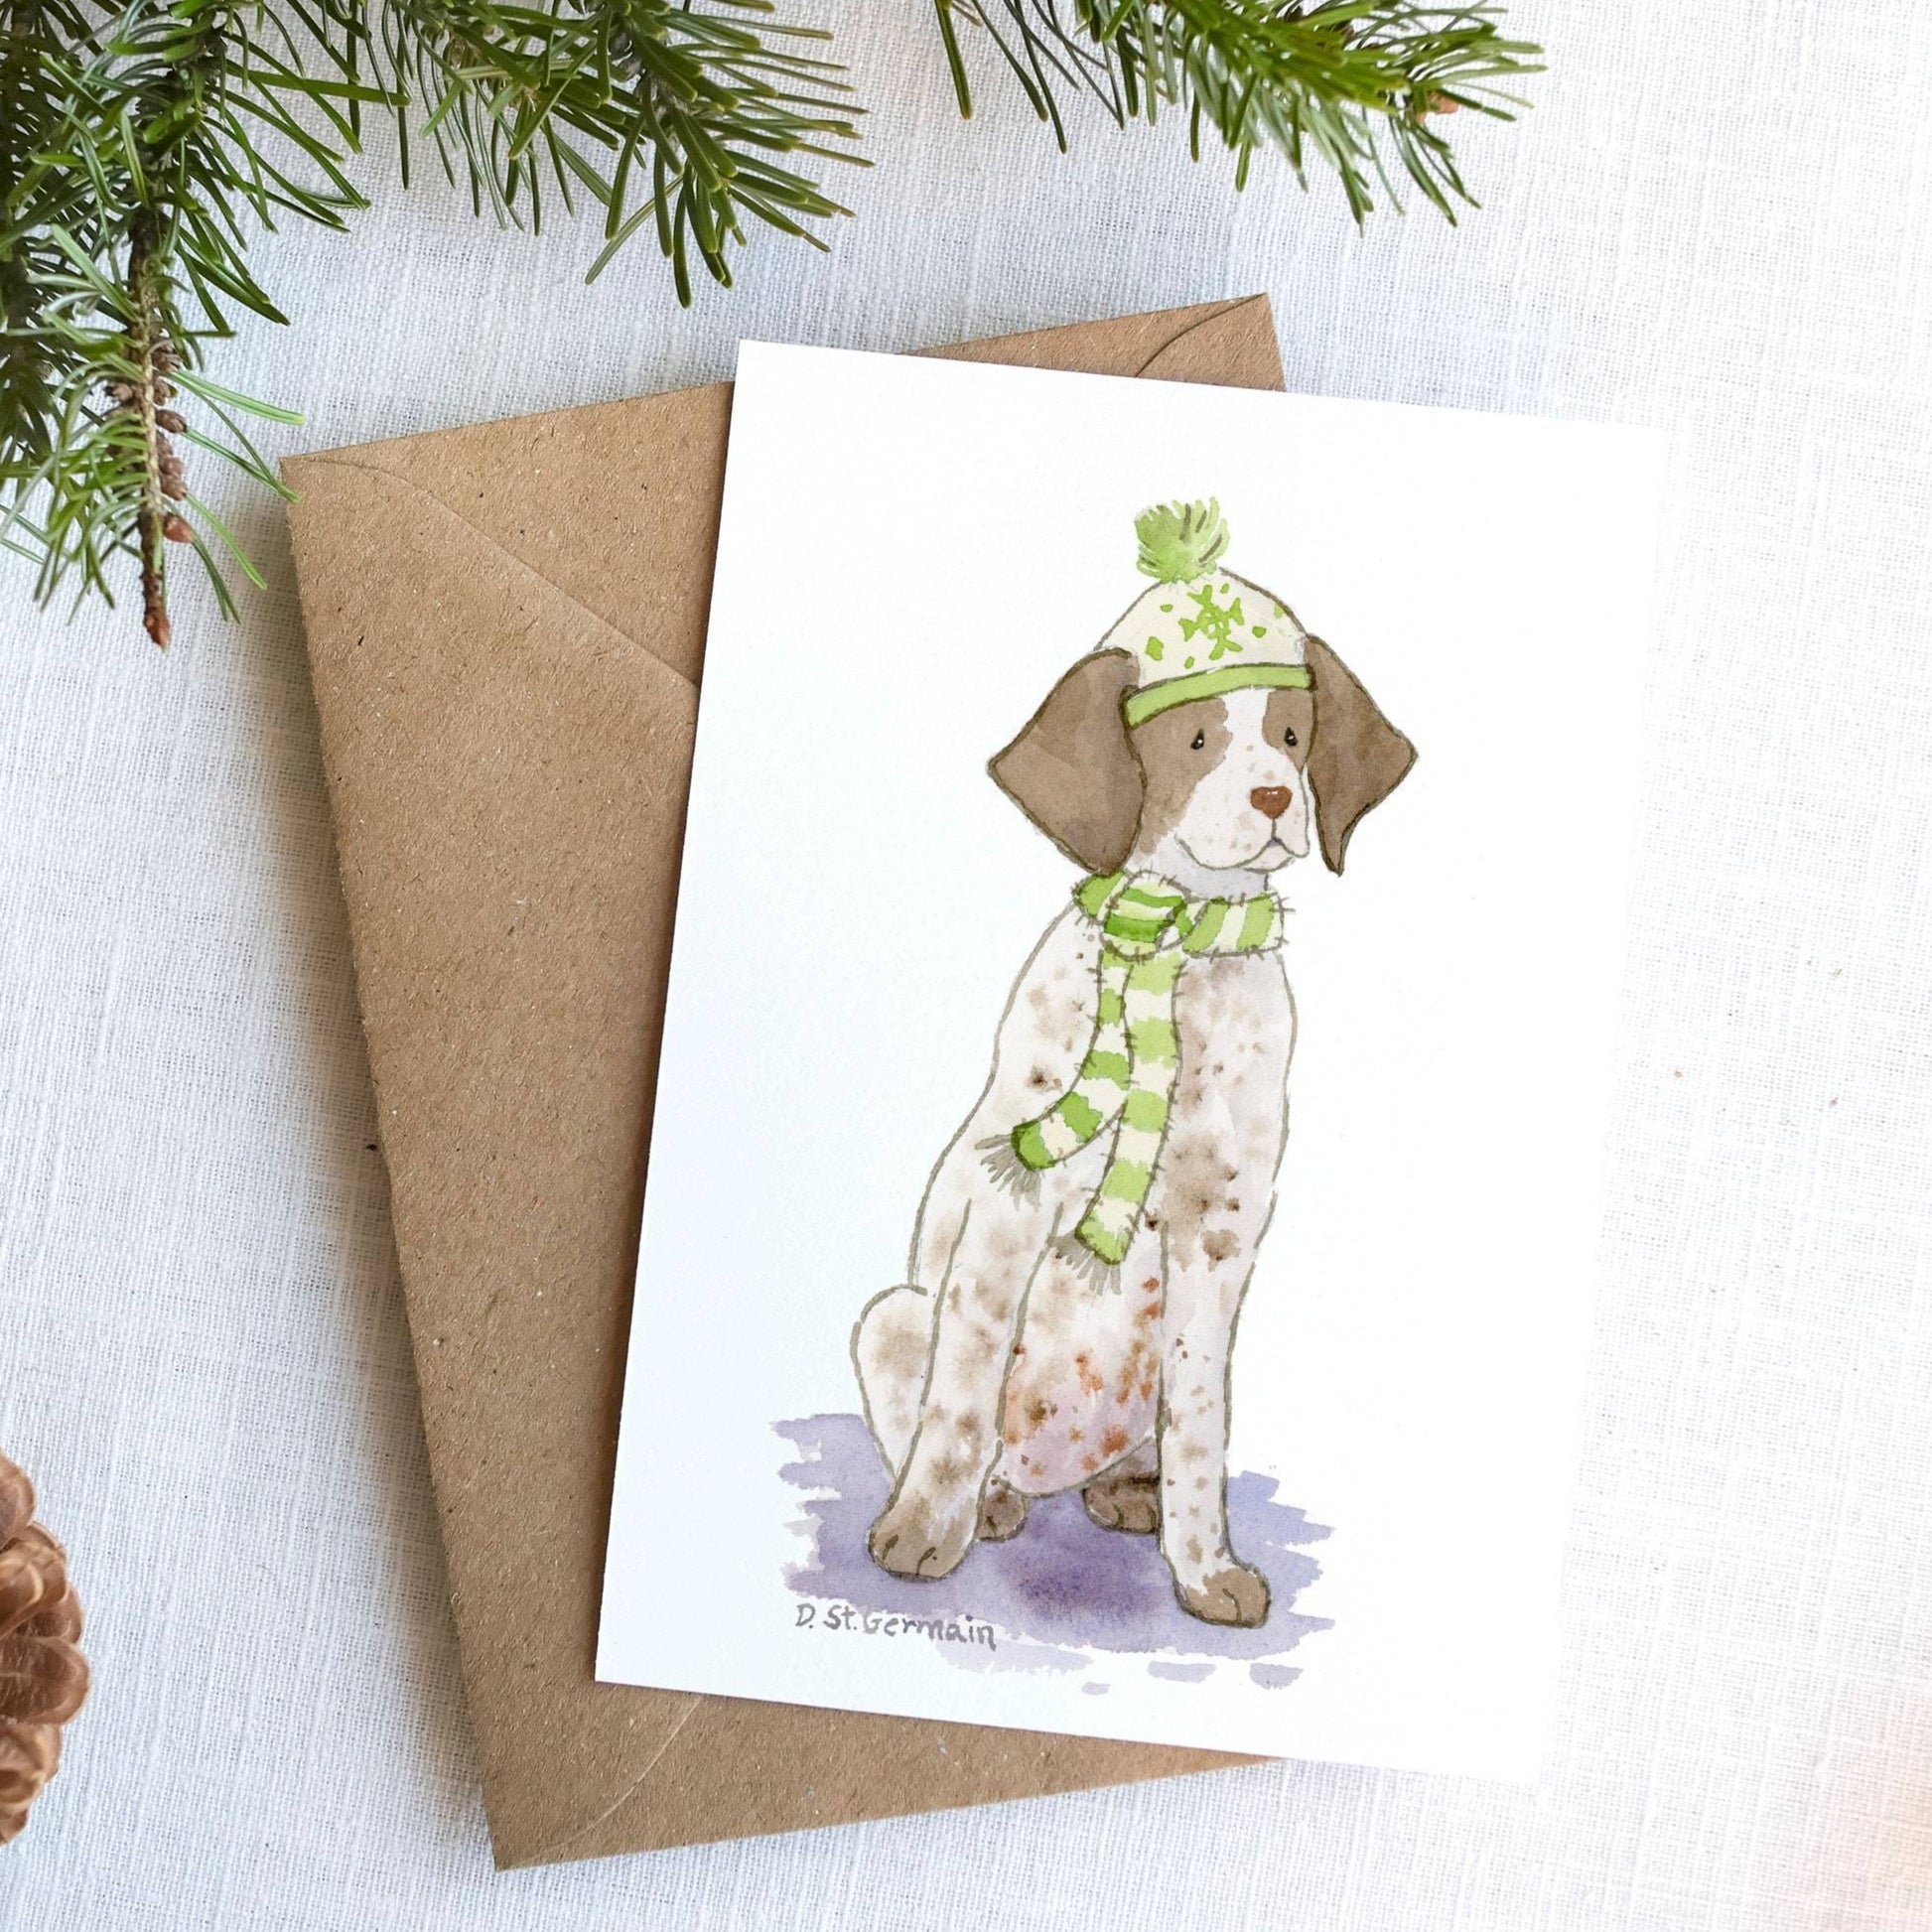 GSP Christmas Card Set, German Shorthaired Pointer, Gsp Lover, GSP Gifts, Dog Lover Card, Cute GSP Card, Pointer Dog Card, Pointer Holiday